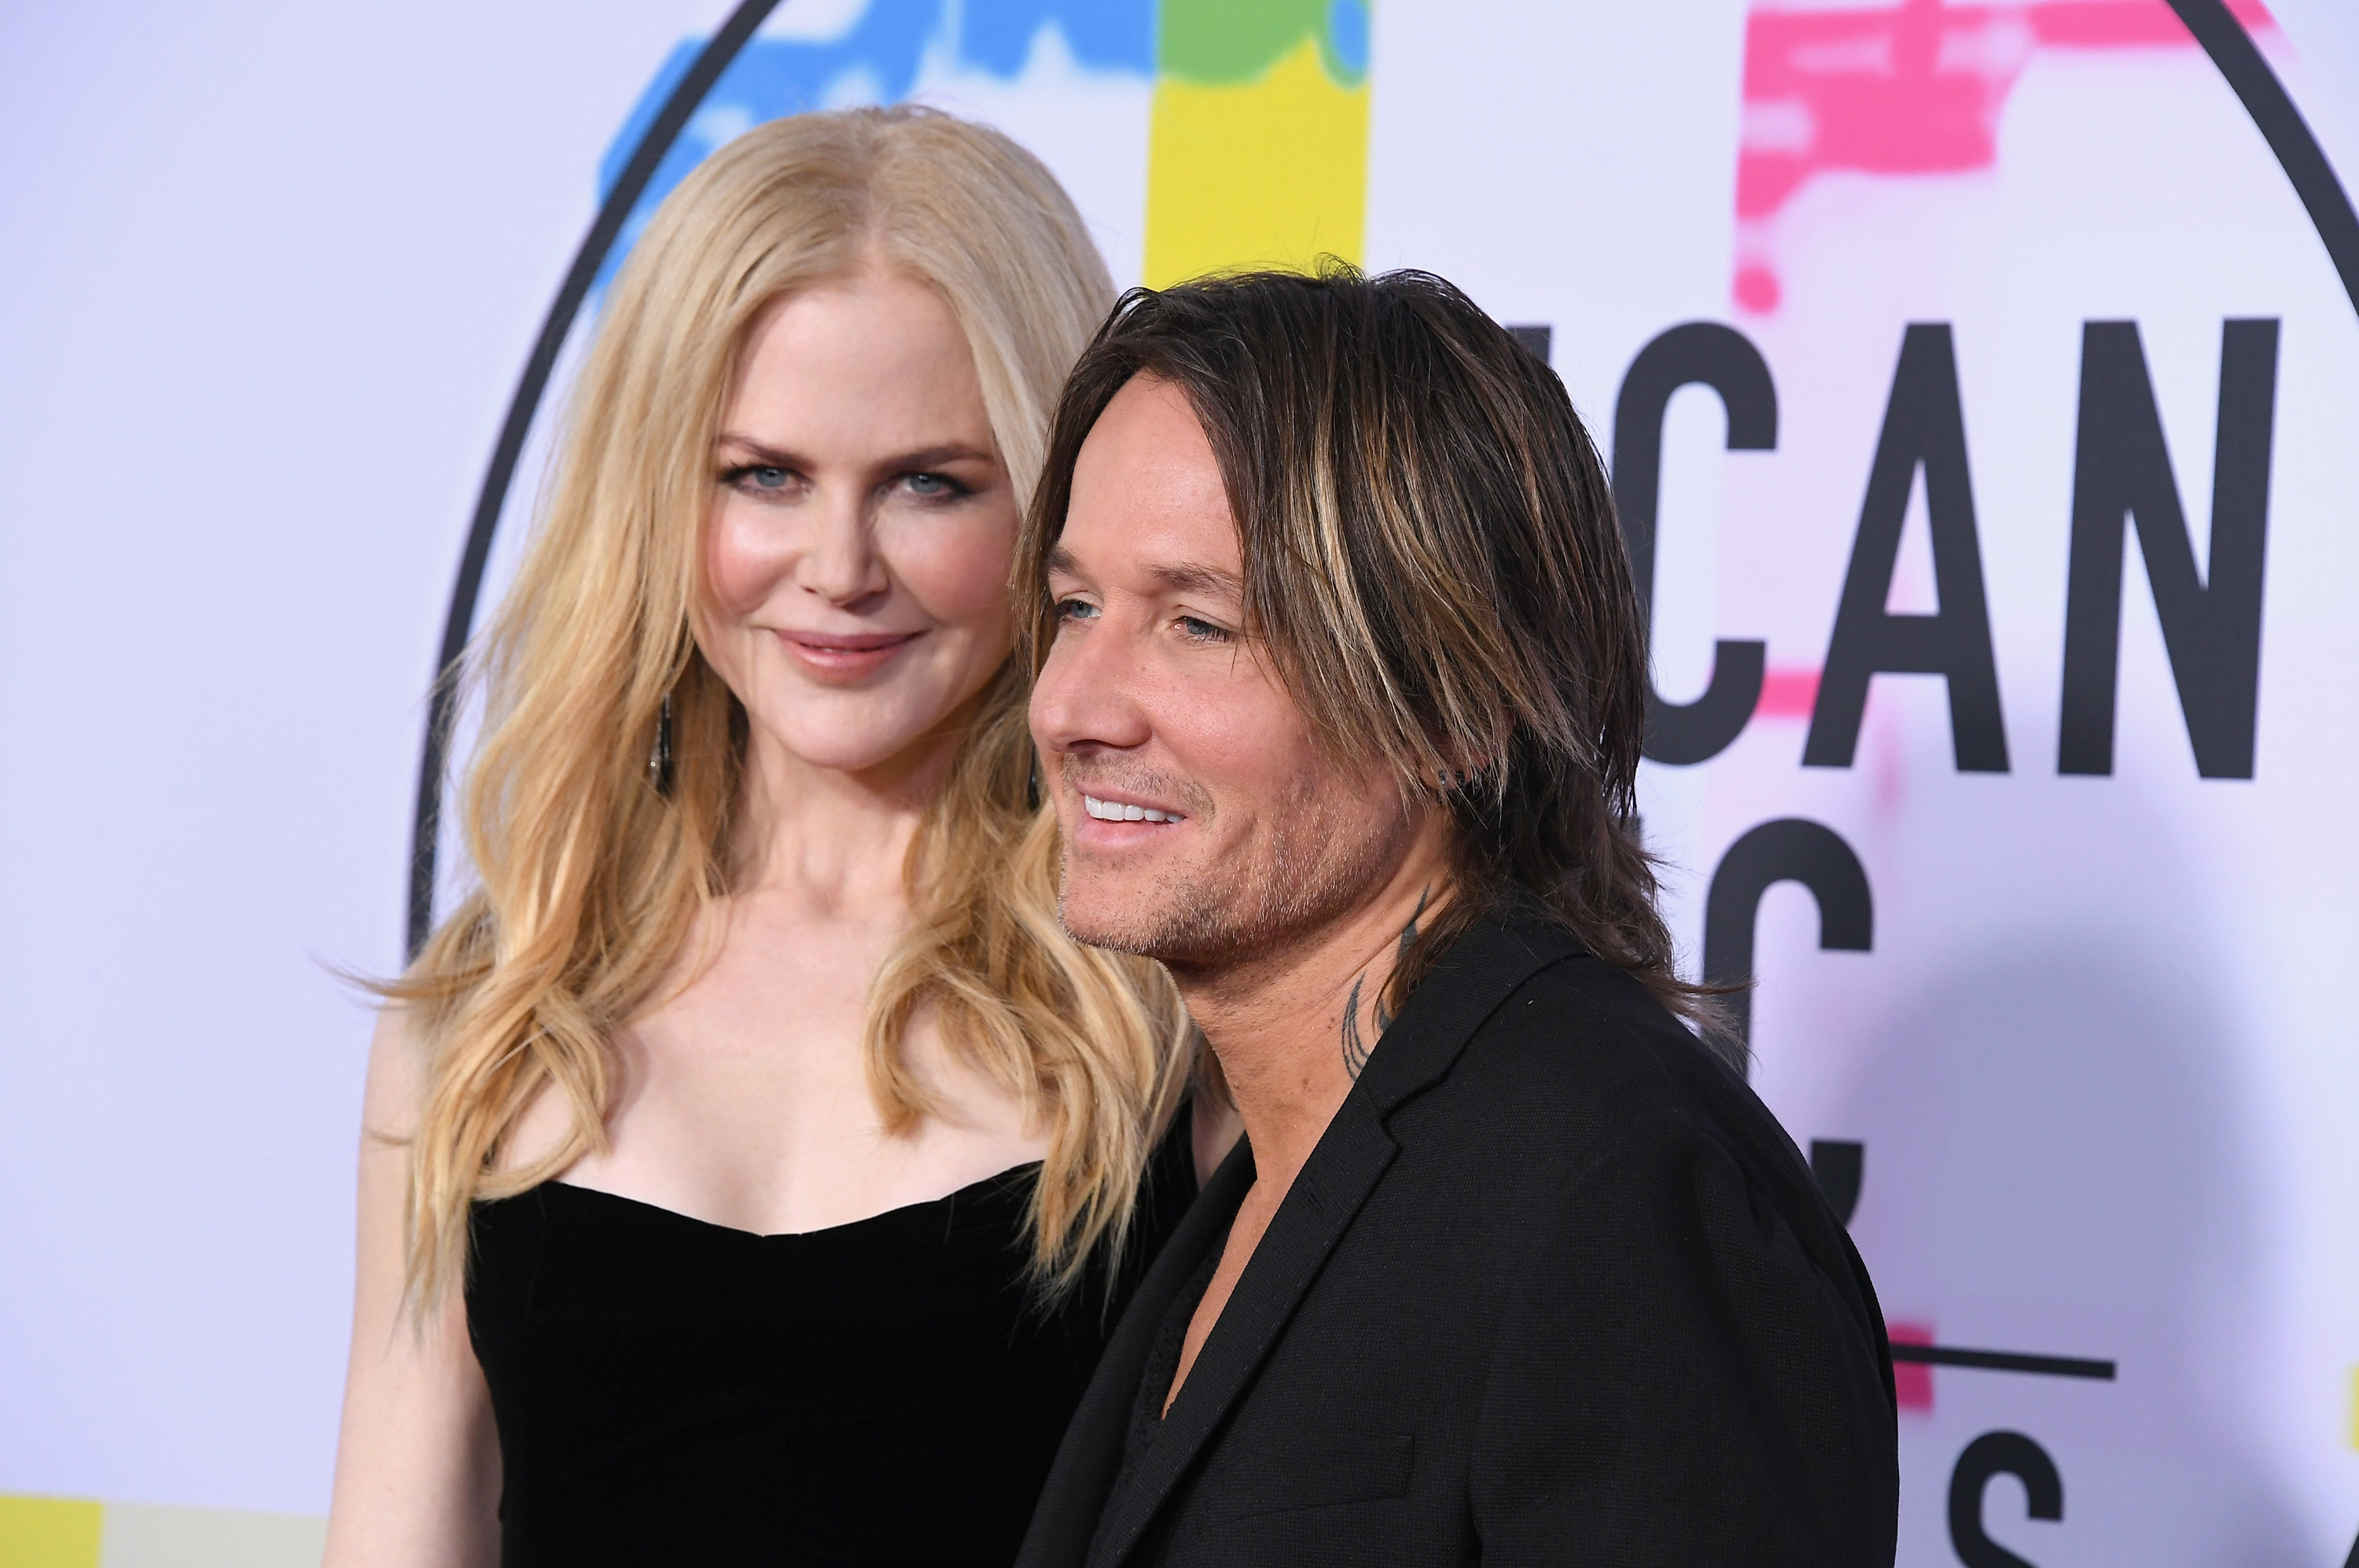 Keith Urban Celebrity News Photos and Videos  Just Jared Celebrity News  and Gossip  Entertainment  Page 43  Page 43